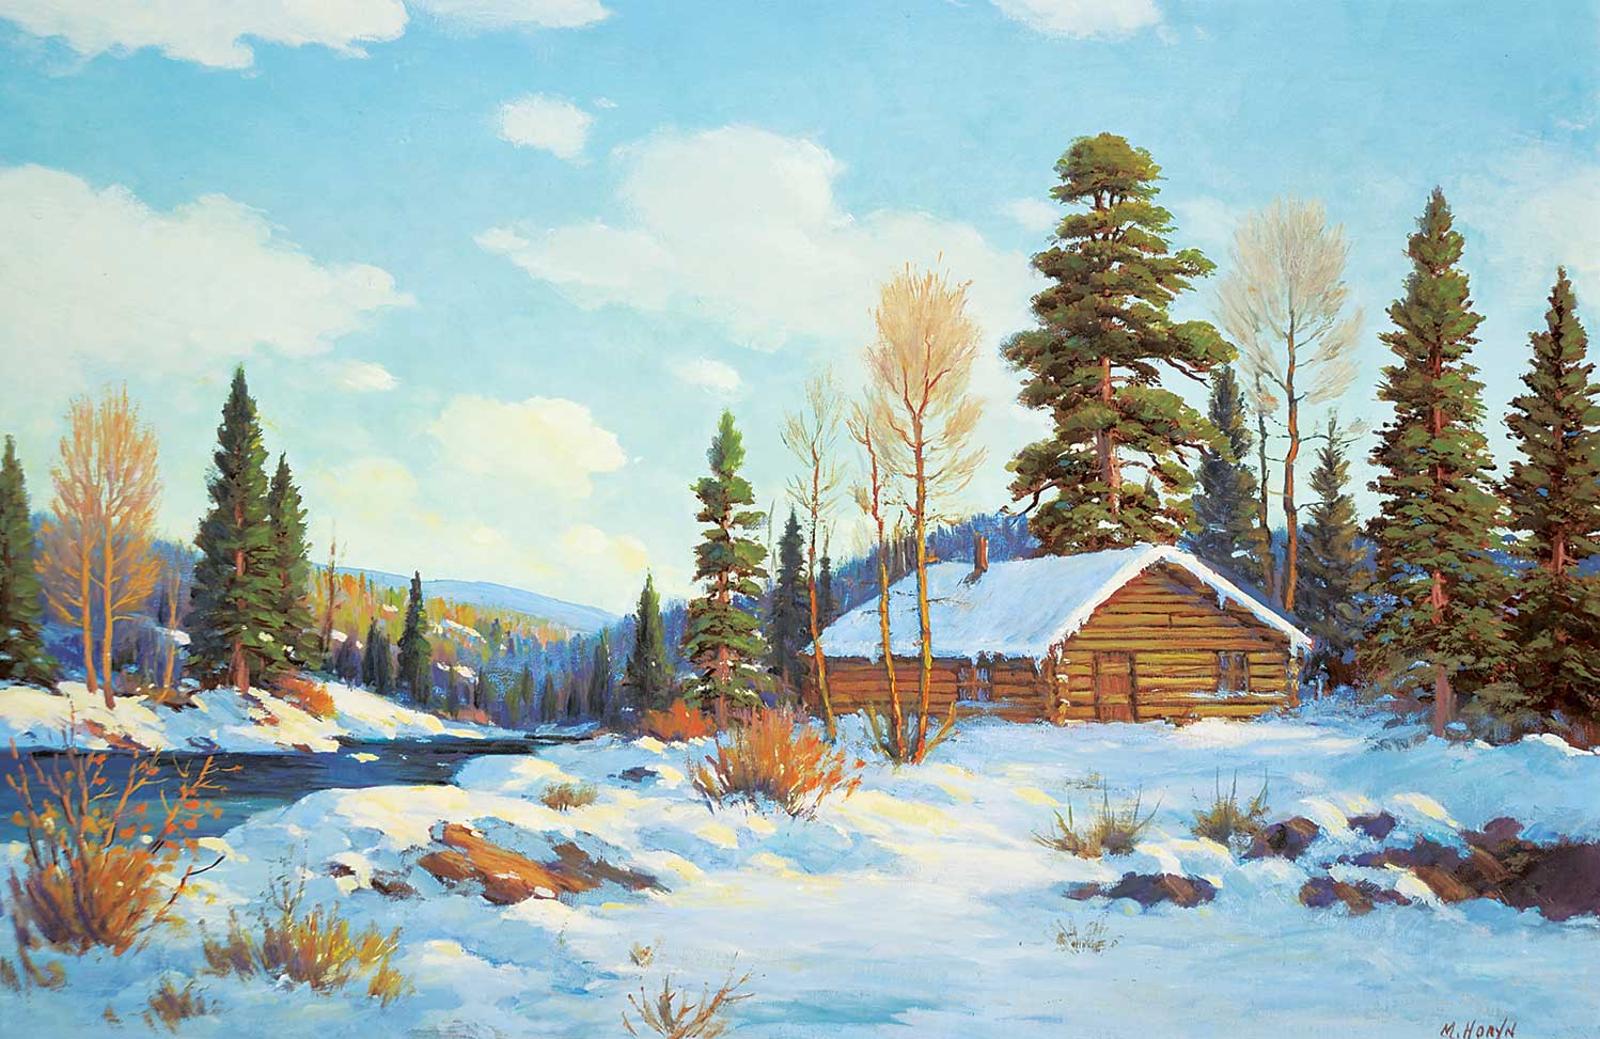 M. Horyn - Untitled - Cabin in the Snow